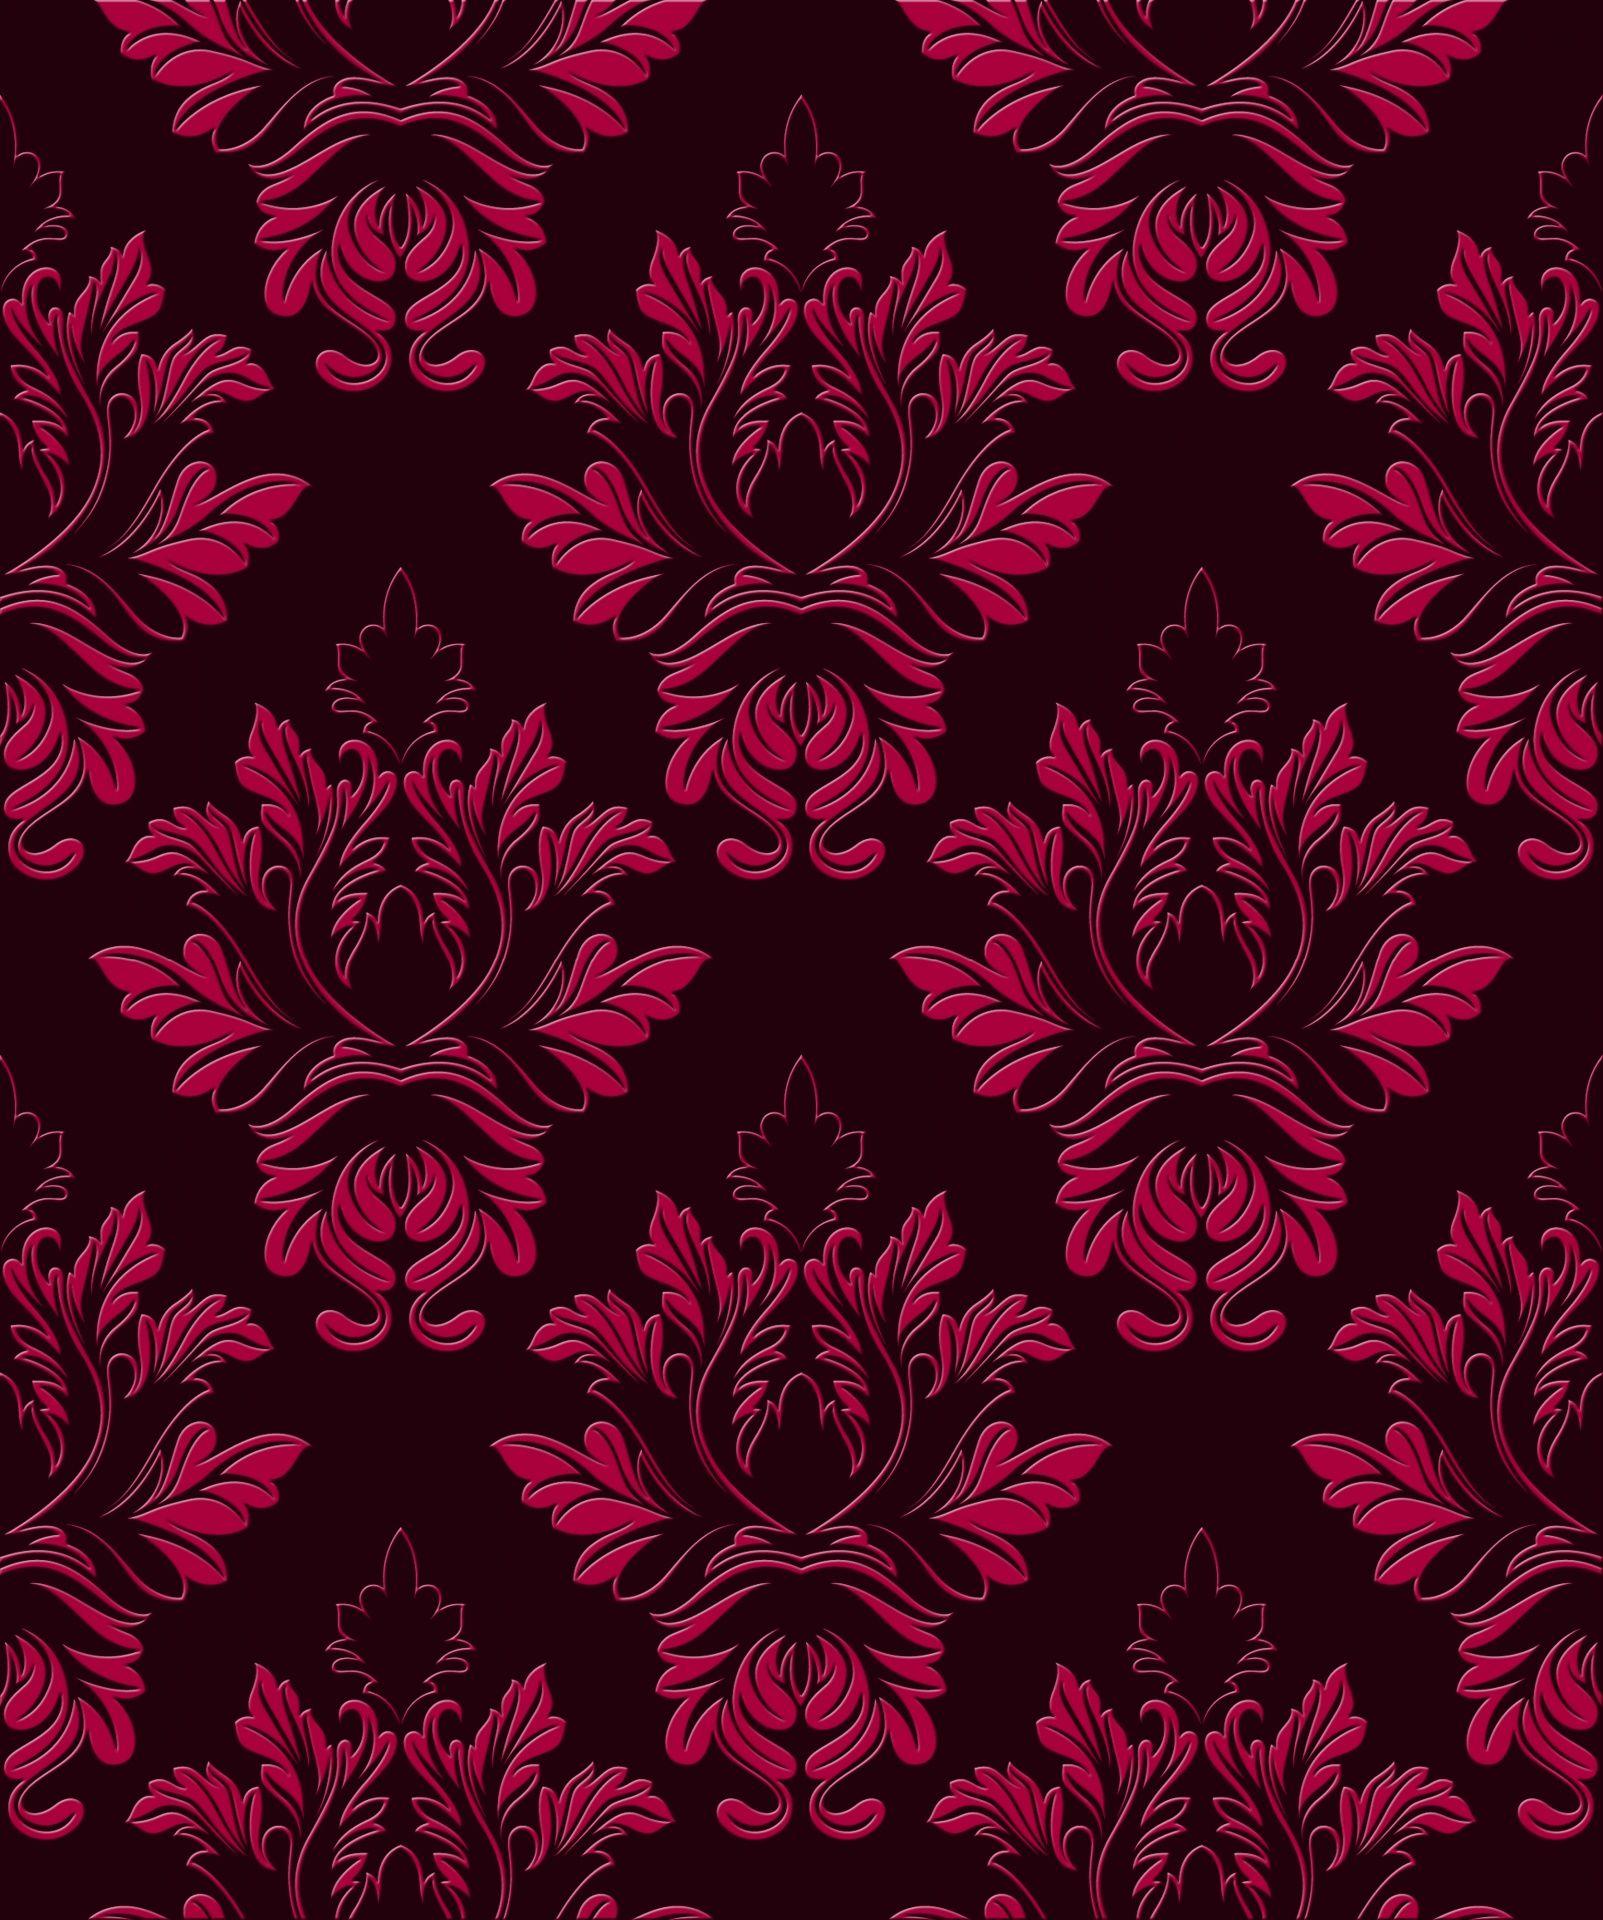 Damask Wallpaper Red & Black Free Domain Picture